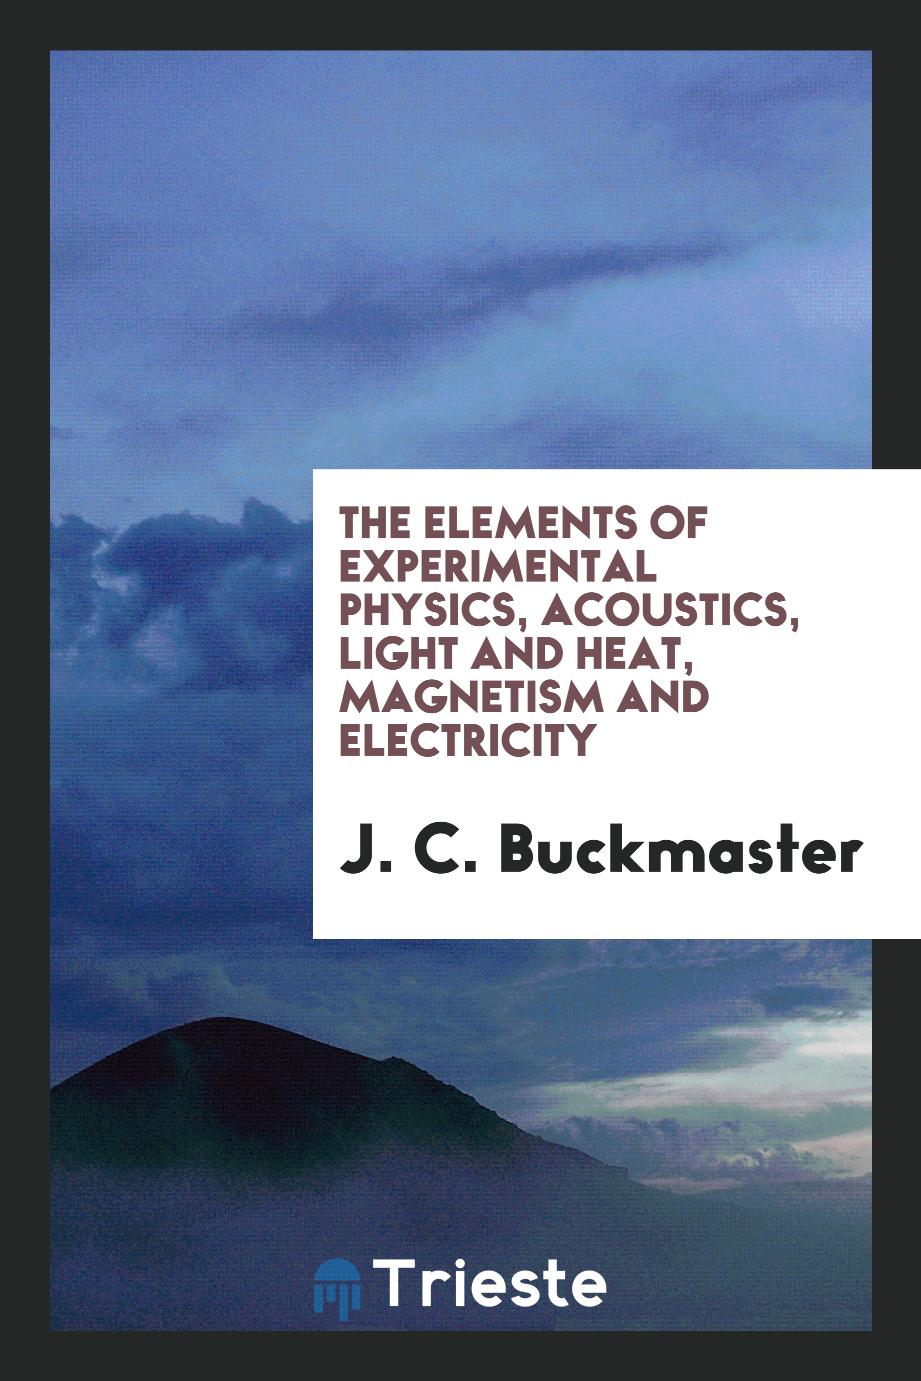 J. C. Buckmaster - The Elements of Experimental Physics, Acoustics, Light and Heat, Magnetism and Electricity